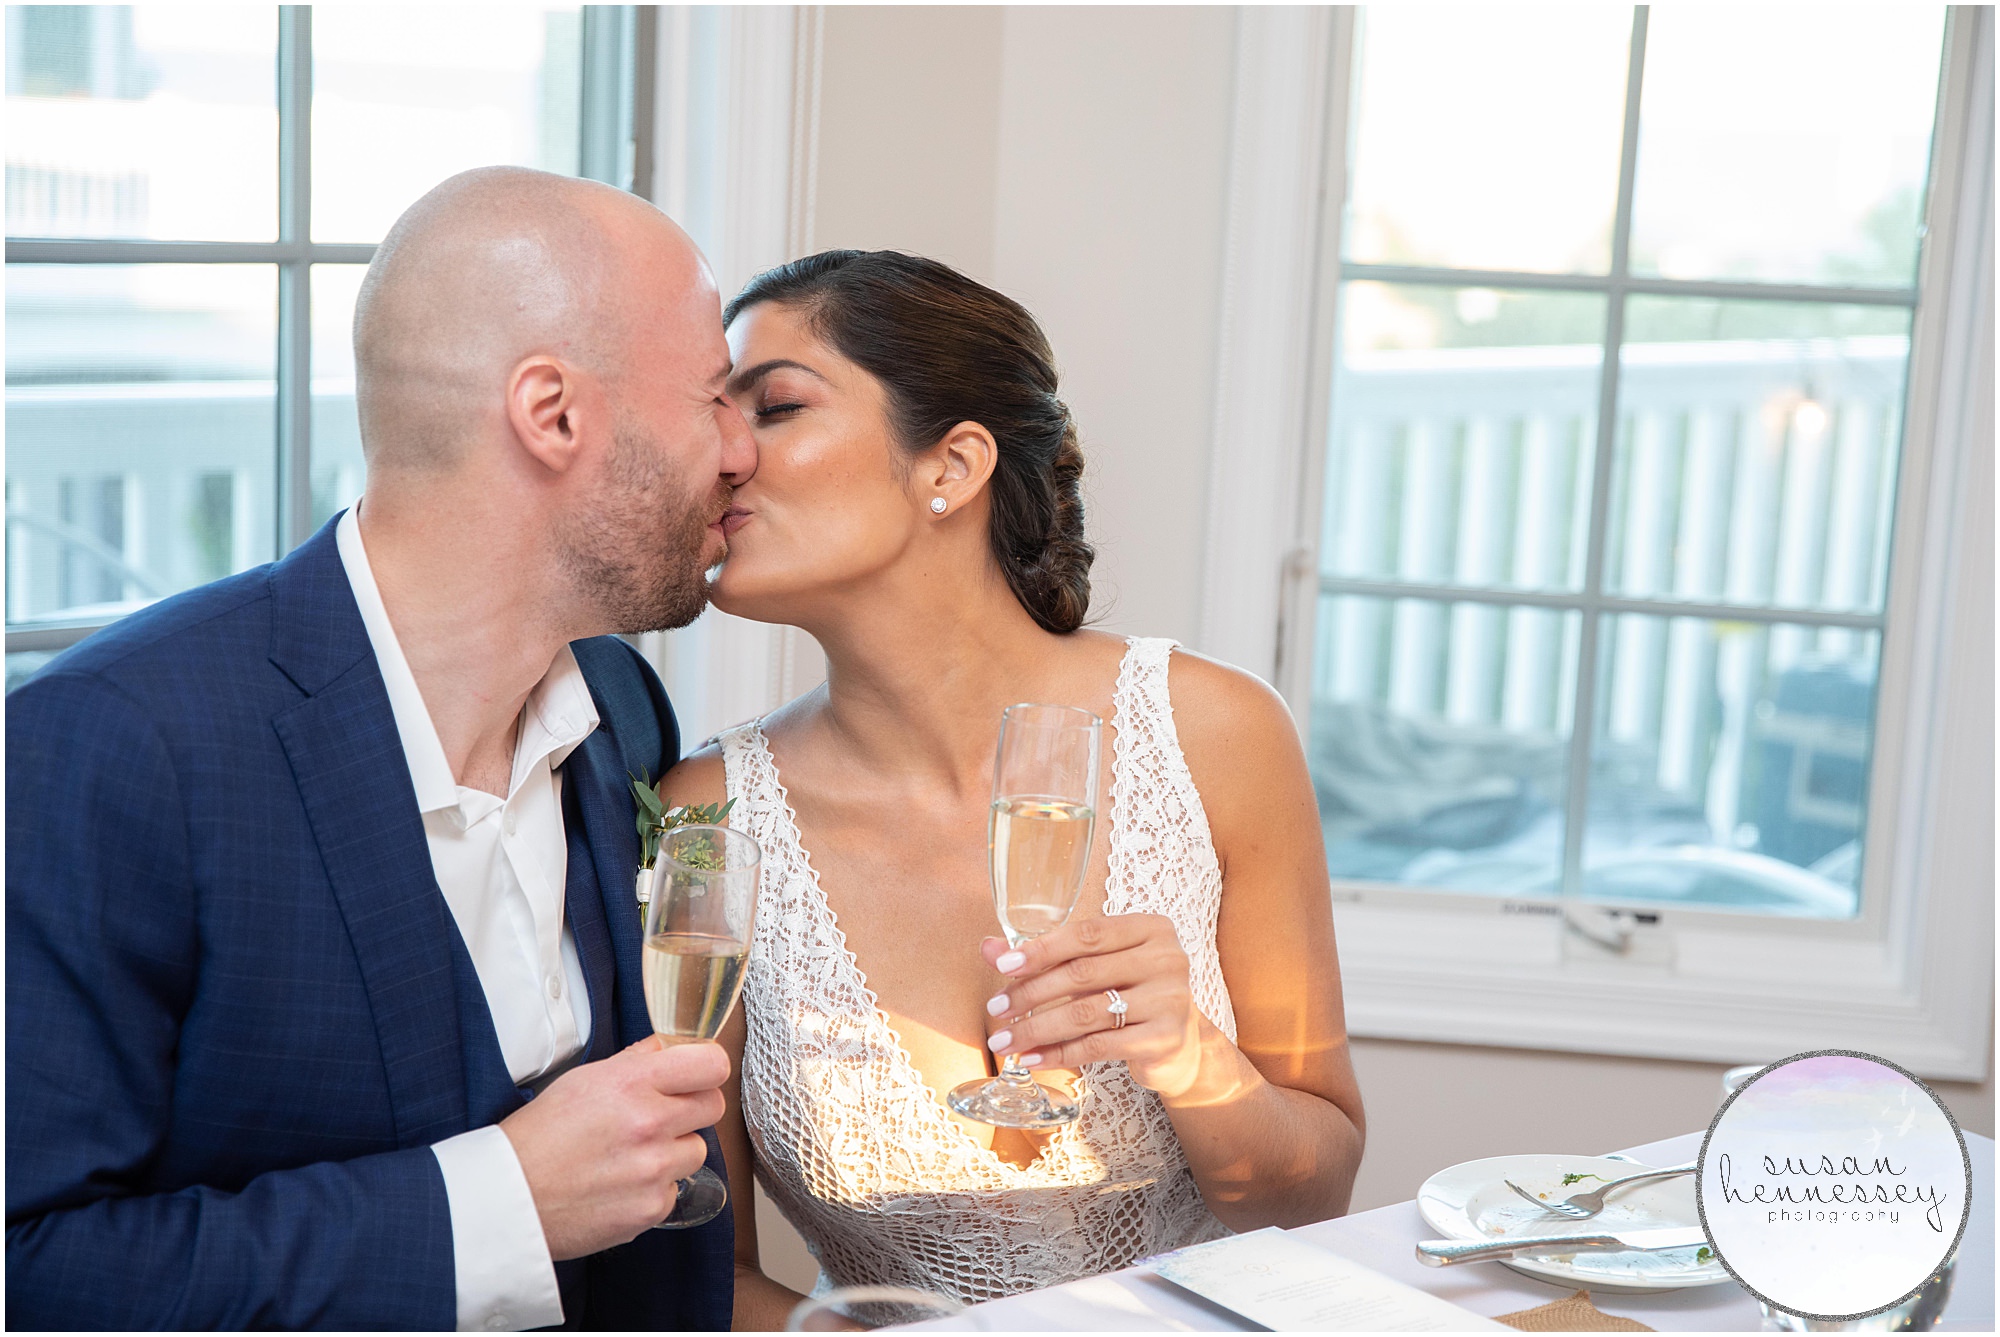 A couple who were just married share a kiss and champagne